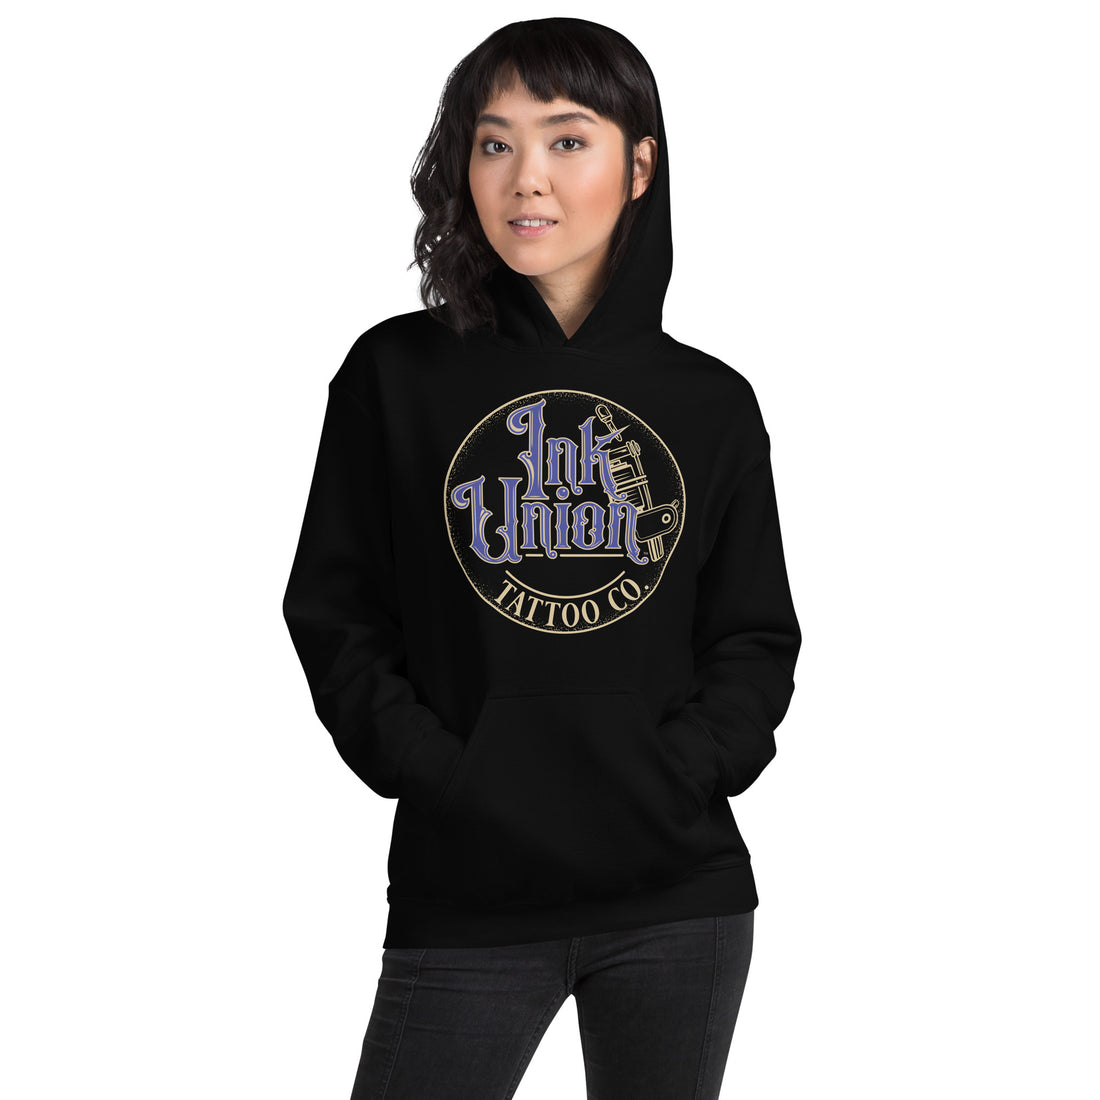 An attractive woman wearing a black hoodie with a gold circle containing fancy lettering in blue and gold that says Ink Union and a gold tattoo machine peeking out from behind on the right side.  There is a dot work gradient inside the circle, and the words Tattoo Co. in gold are at the bottom of the design.